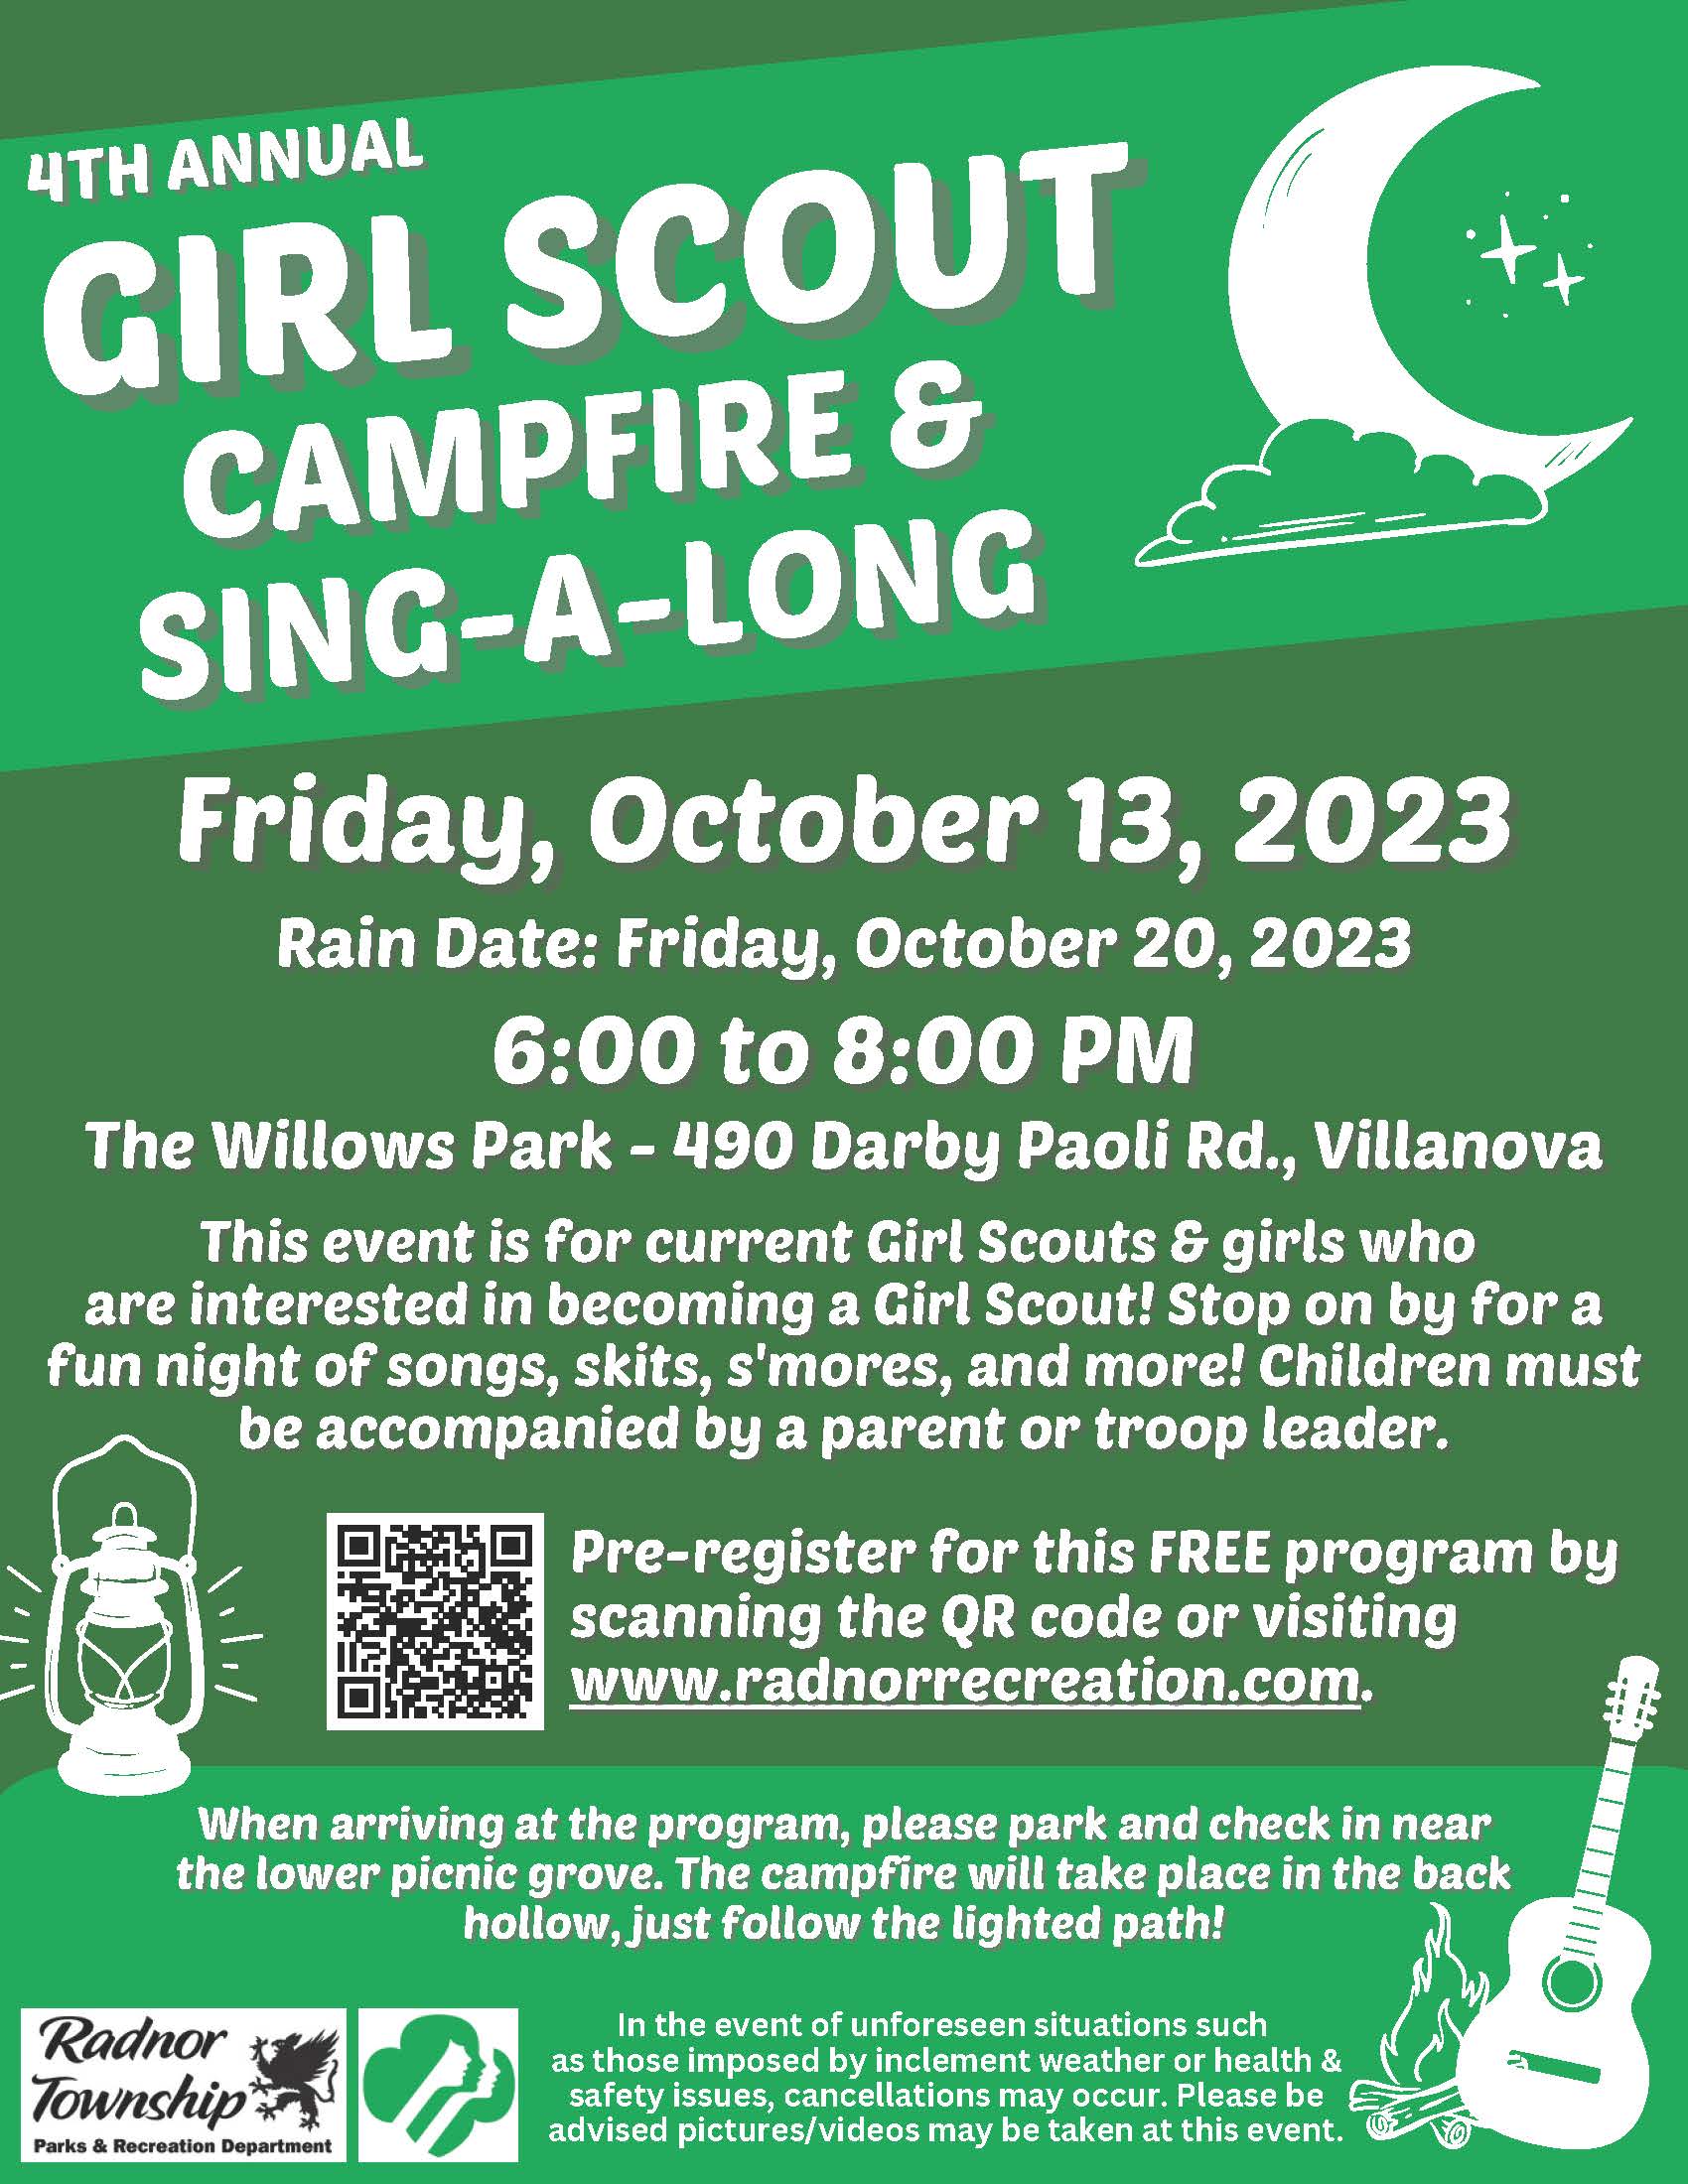 2023 Girl Scout Sing-A-Long Flyer.